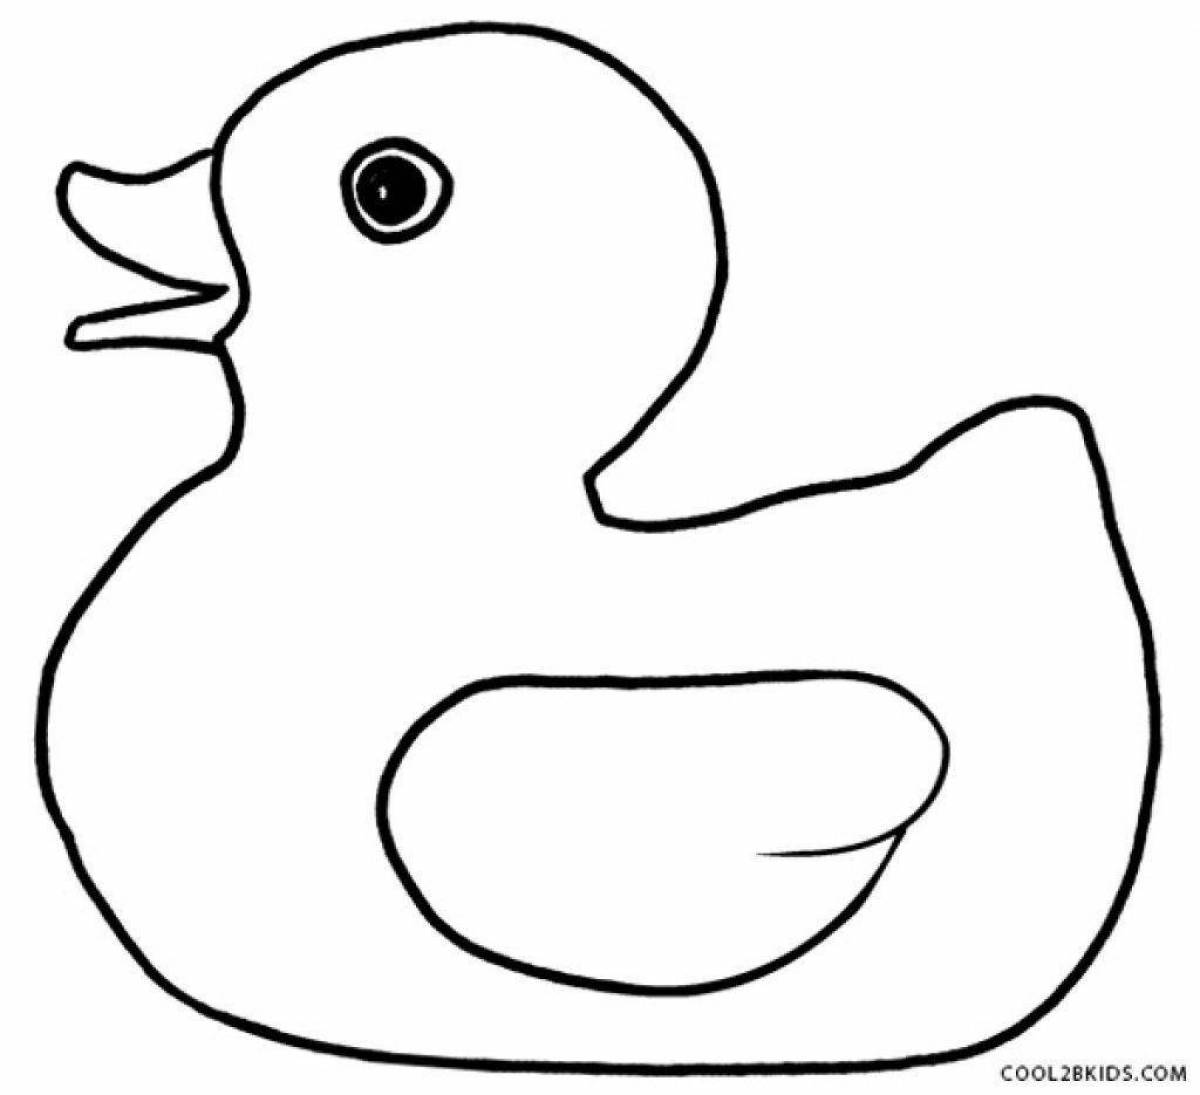 Dazzling Dymkovo duck, the second oldest coloring page